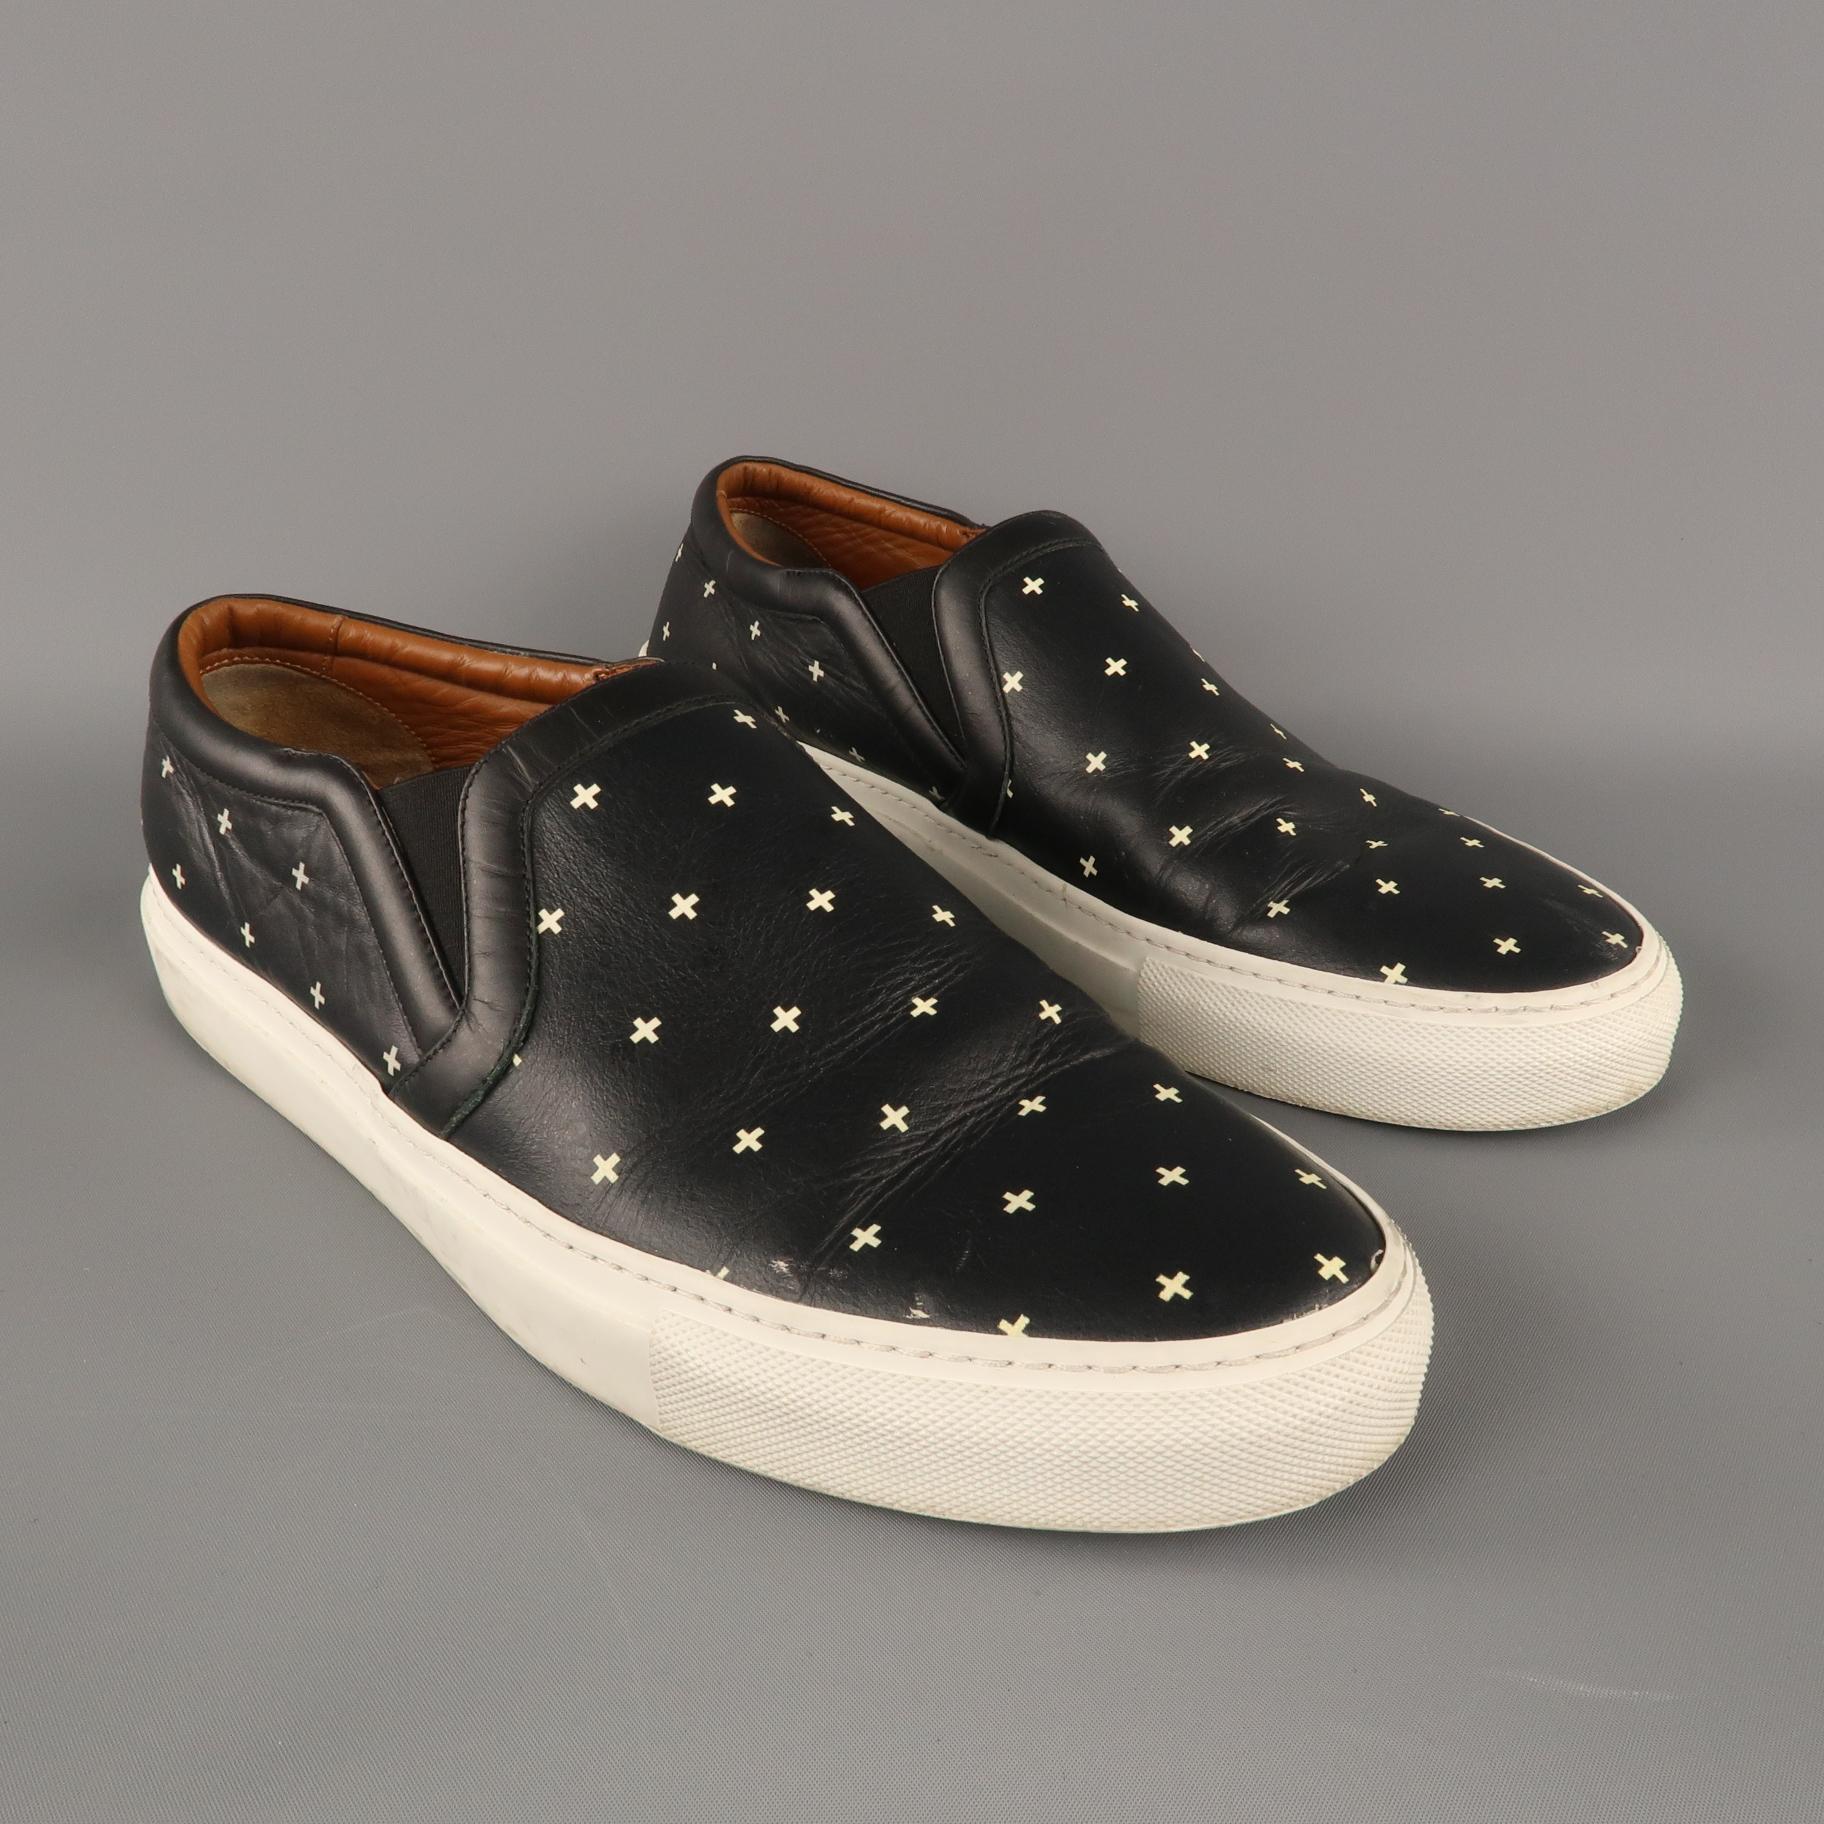 GIVENCHY Slip on Sneakers comes in black and white tones in a cross printed leather material, with a white rubber sole. Made in Italy.
 
Very Good Pre-Owned Condition.
Marked: IT 44
 
Outsole: 12.5 x 4.5 in.